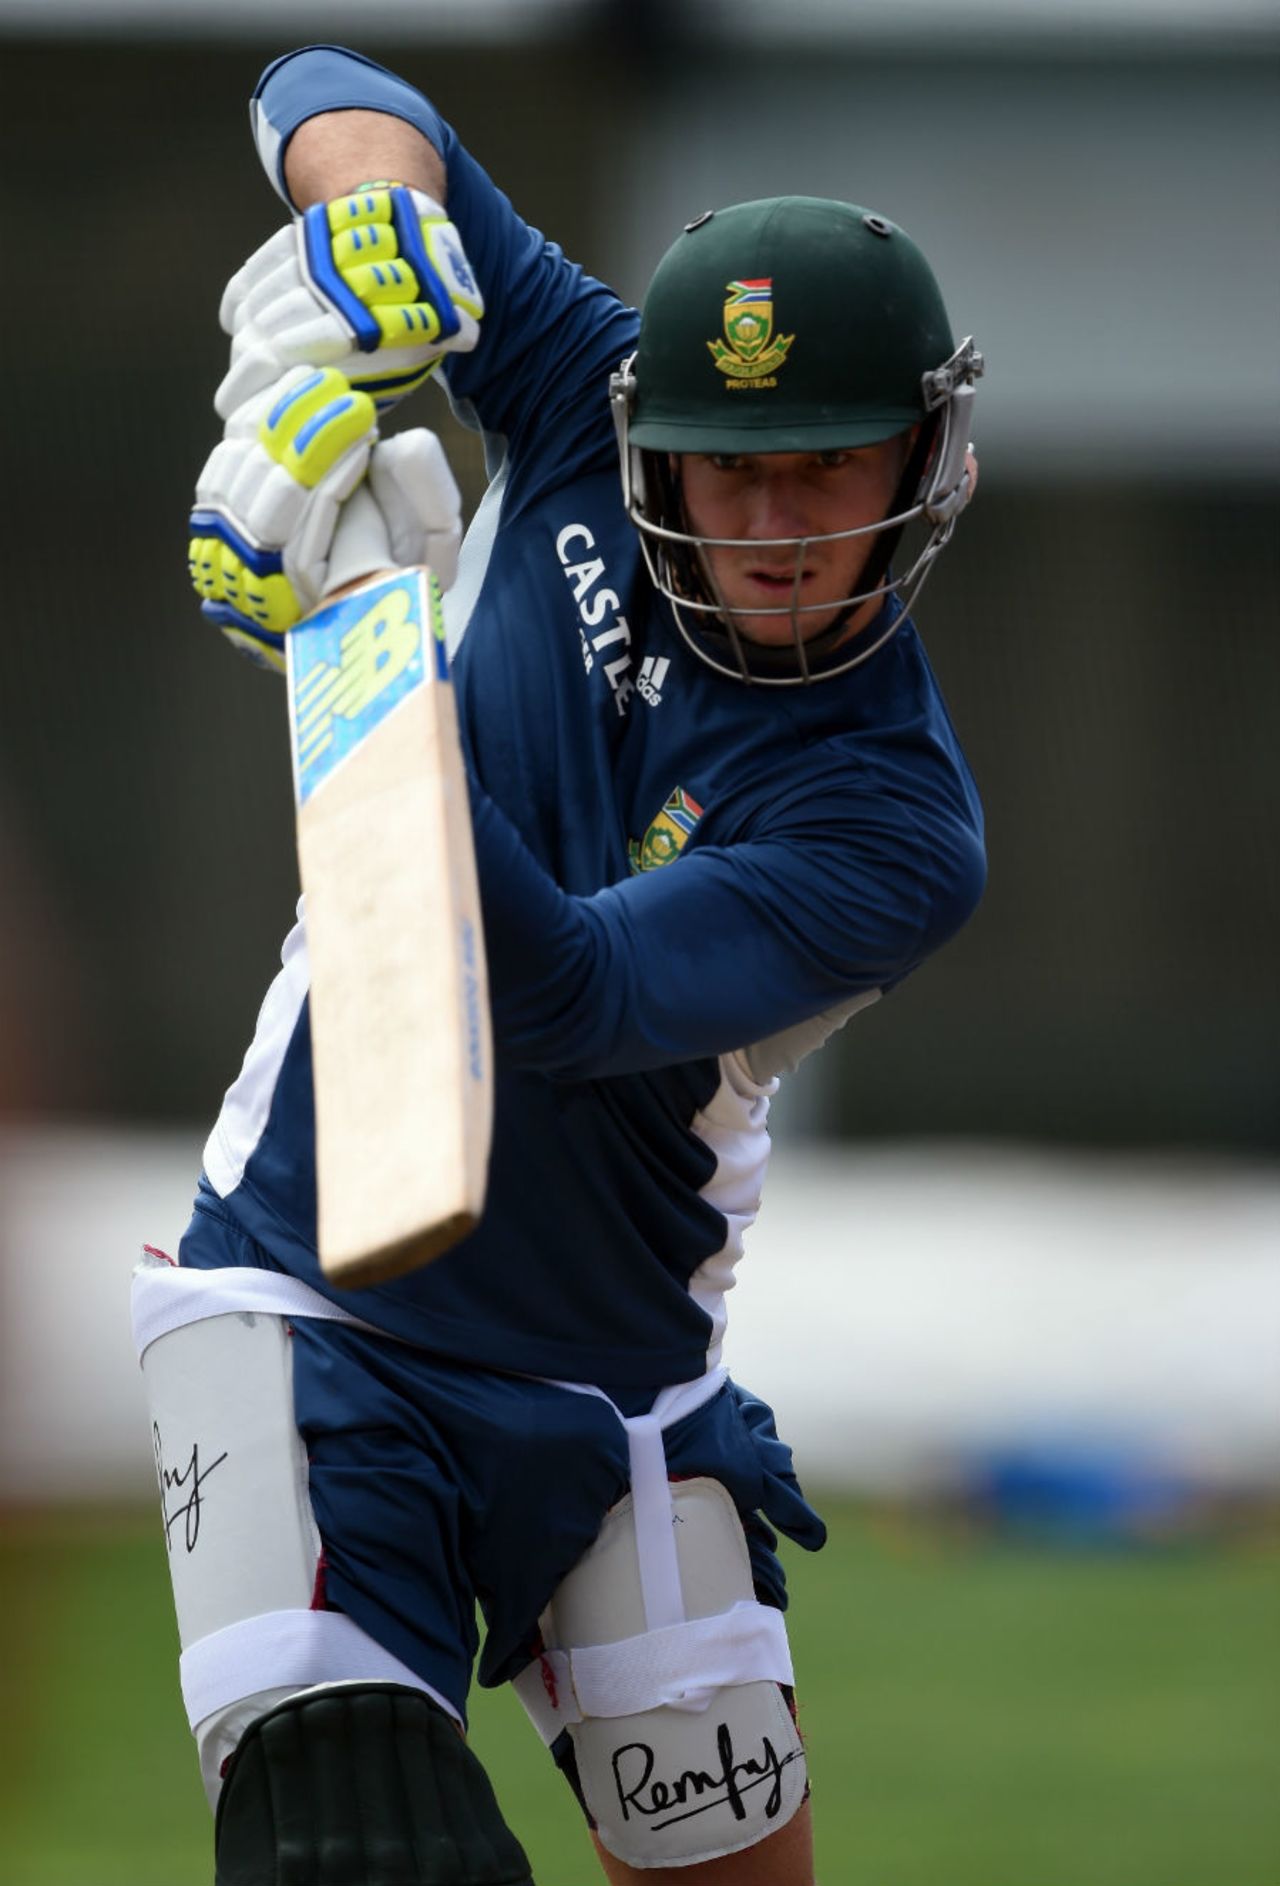 David Miller bats during a practice session, World Cup 2015, Sydney, March 16, 2015